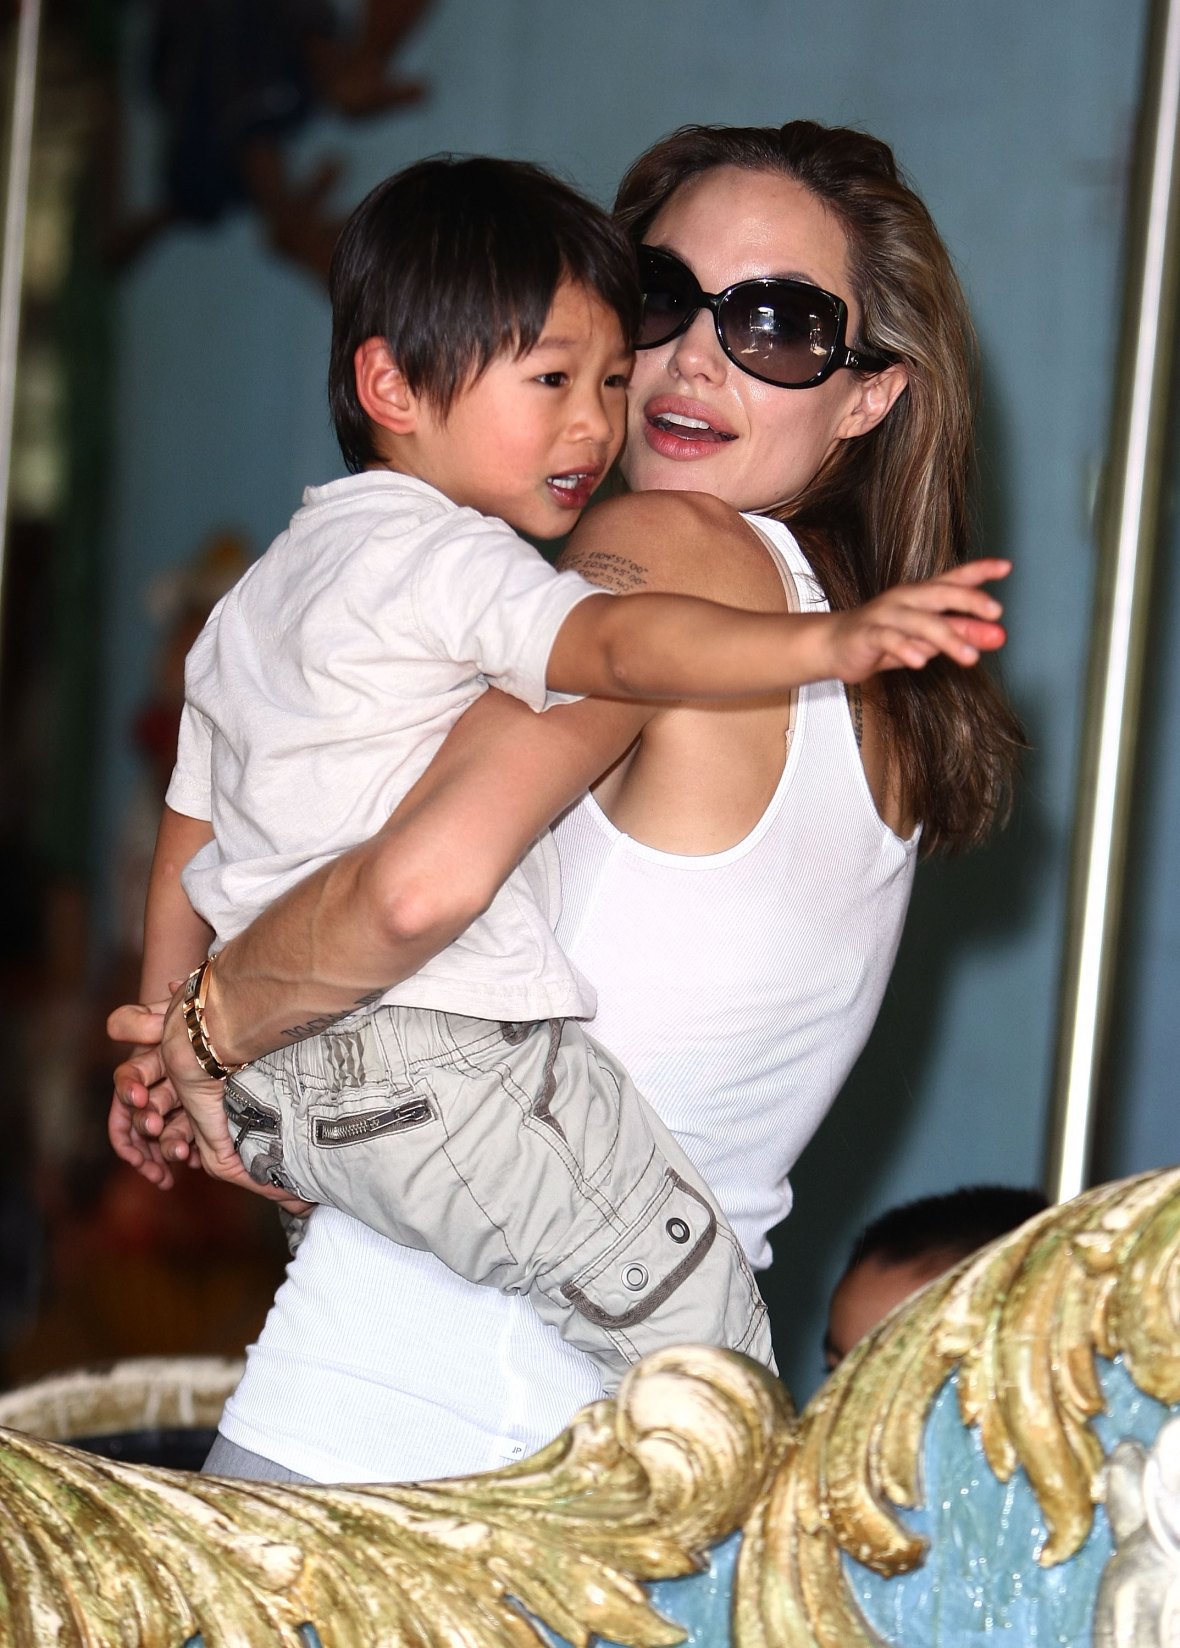 Angelina Jolie enjoys valuable family moments in NYC with son Pax